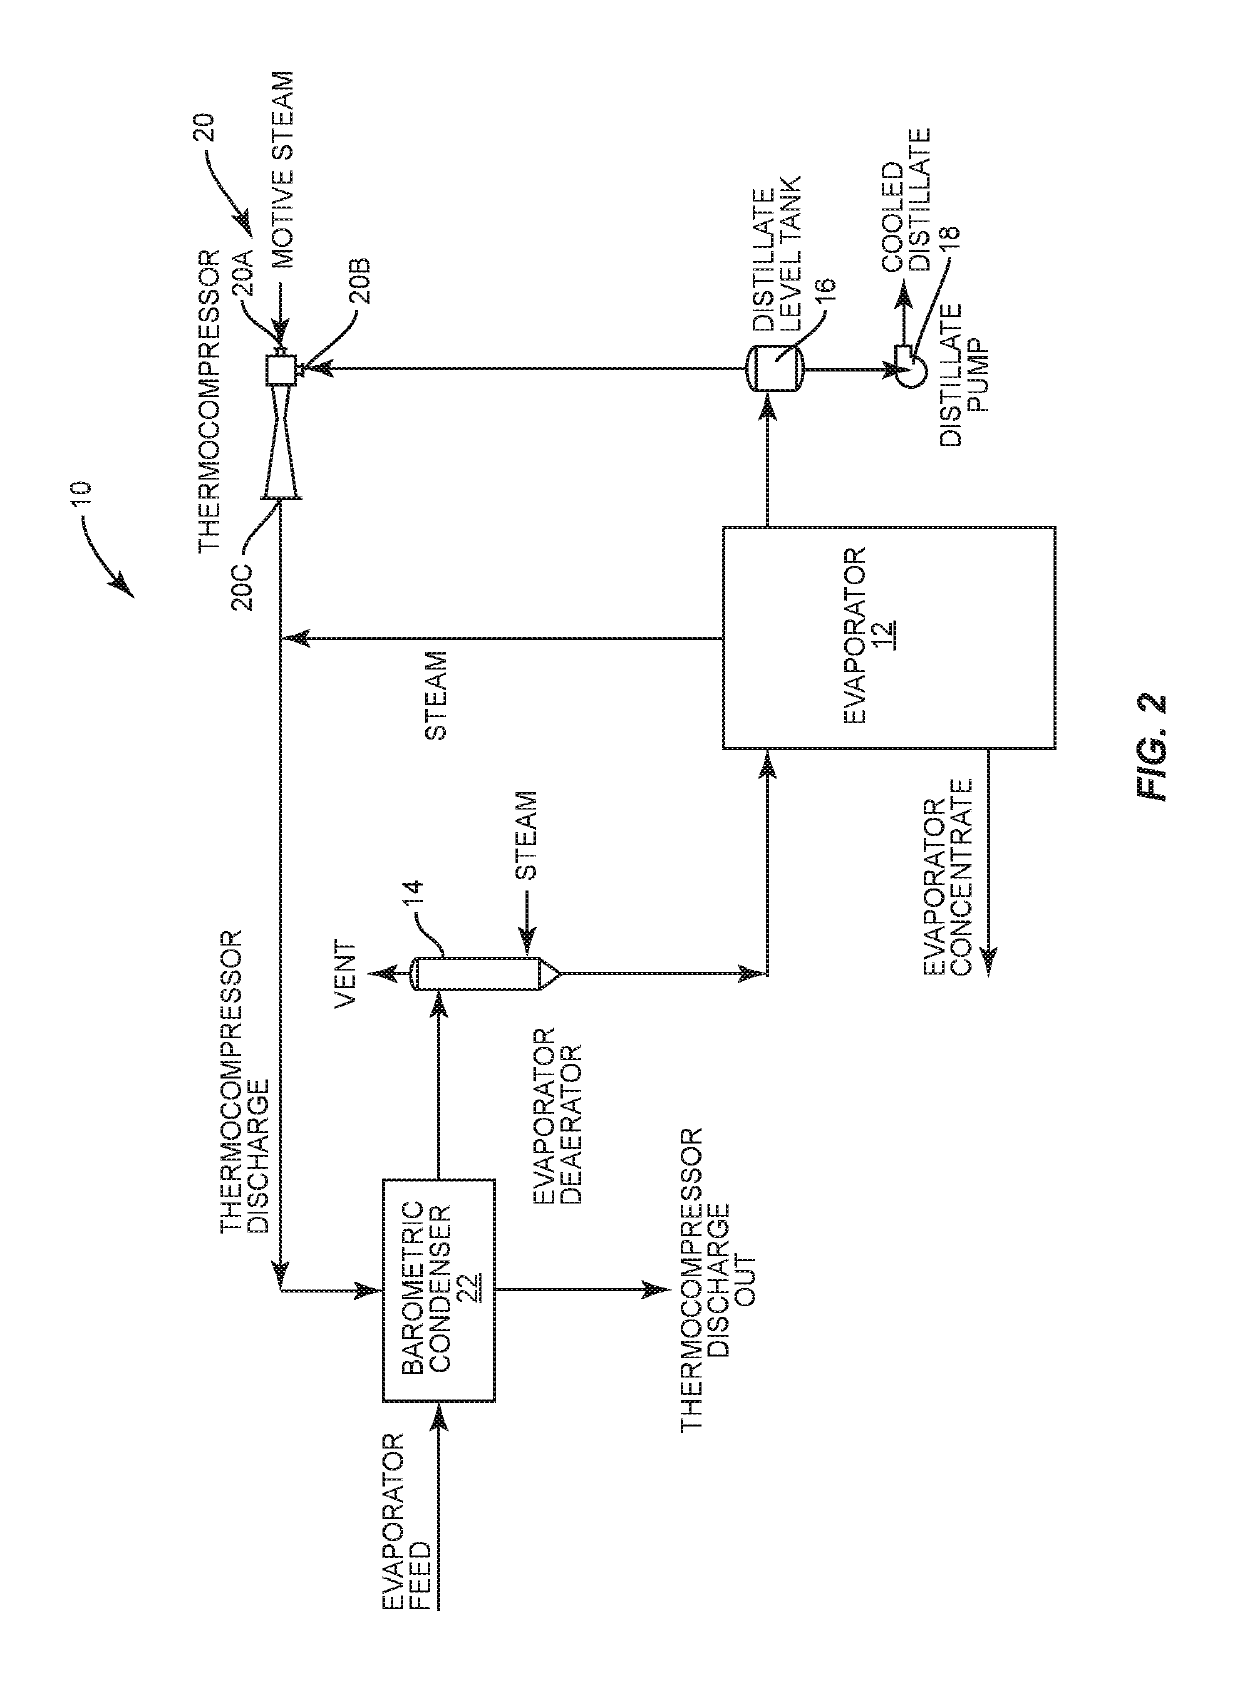 System and process for preheating evaporator feedwater